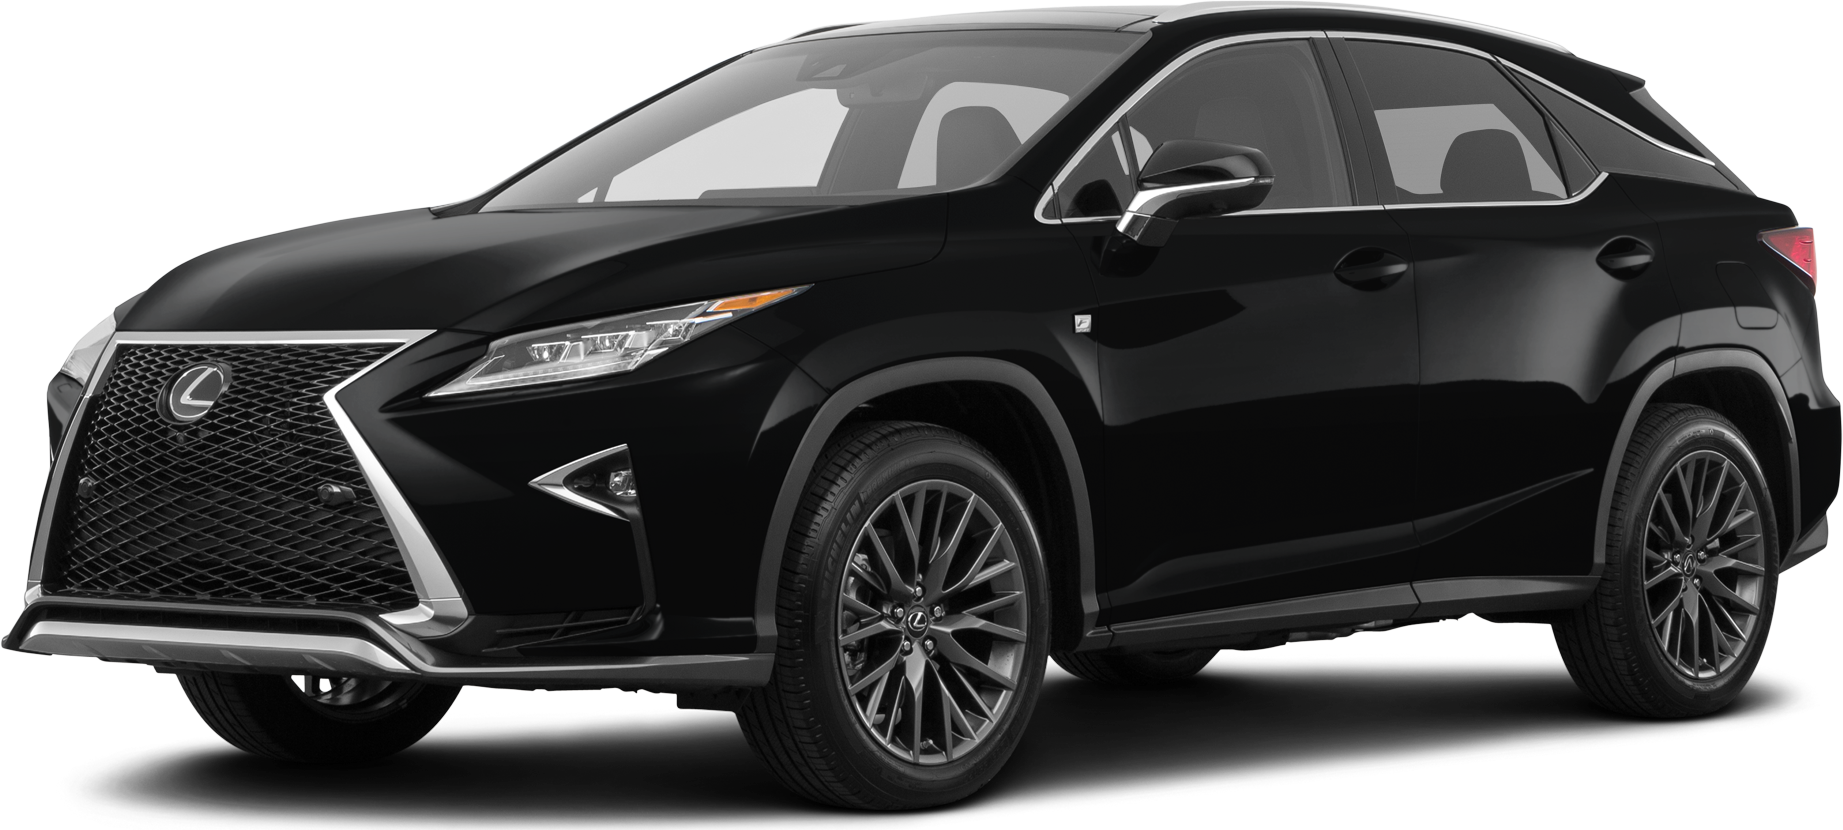 2016 Lexus RX350 Prices Reviews and Photos  MotorTrend